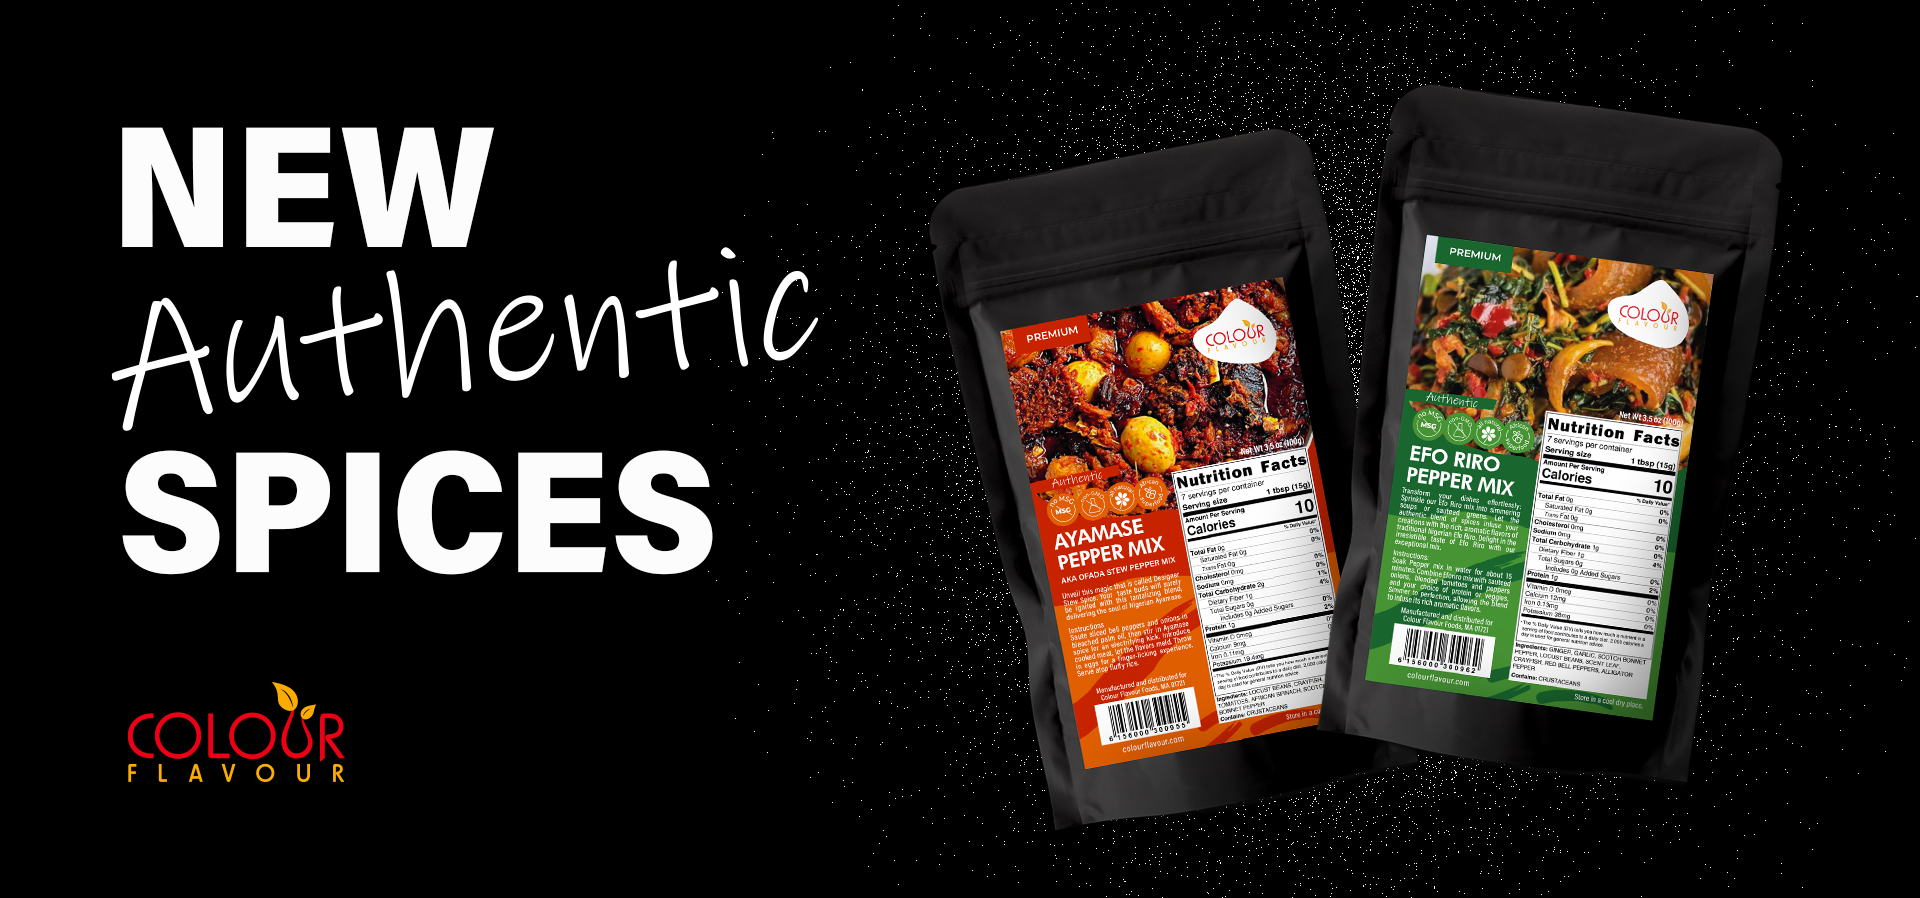 Text say: new authentic spices, there are two pouches of spices and the brand's logo.